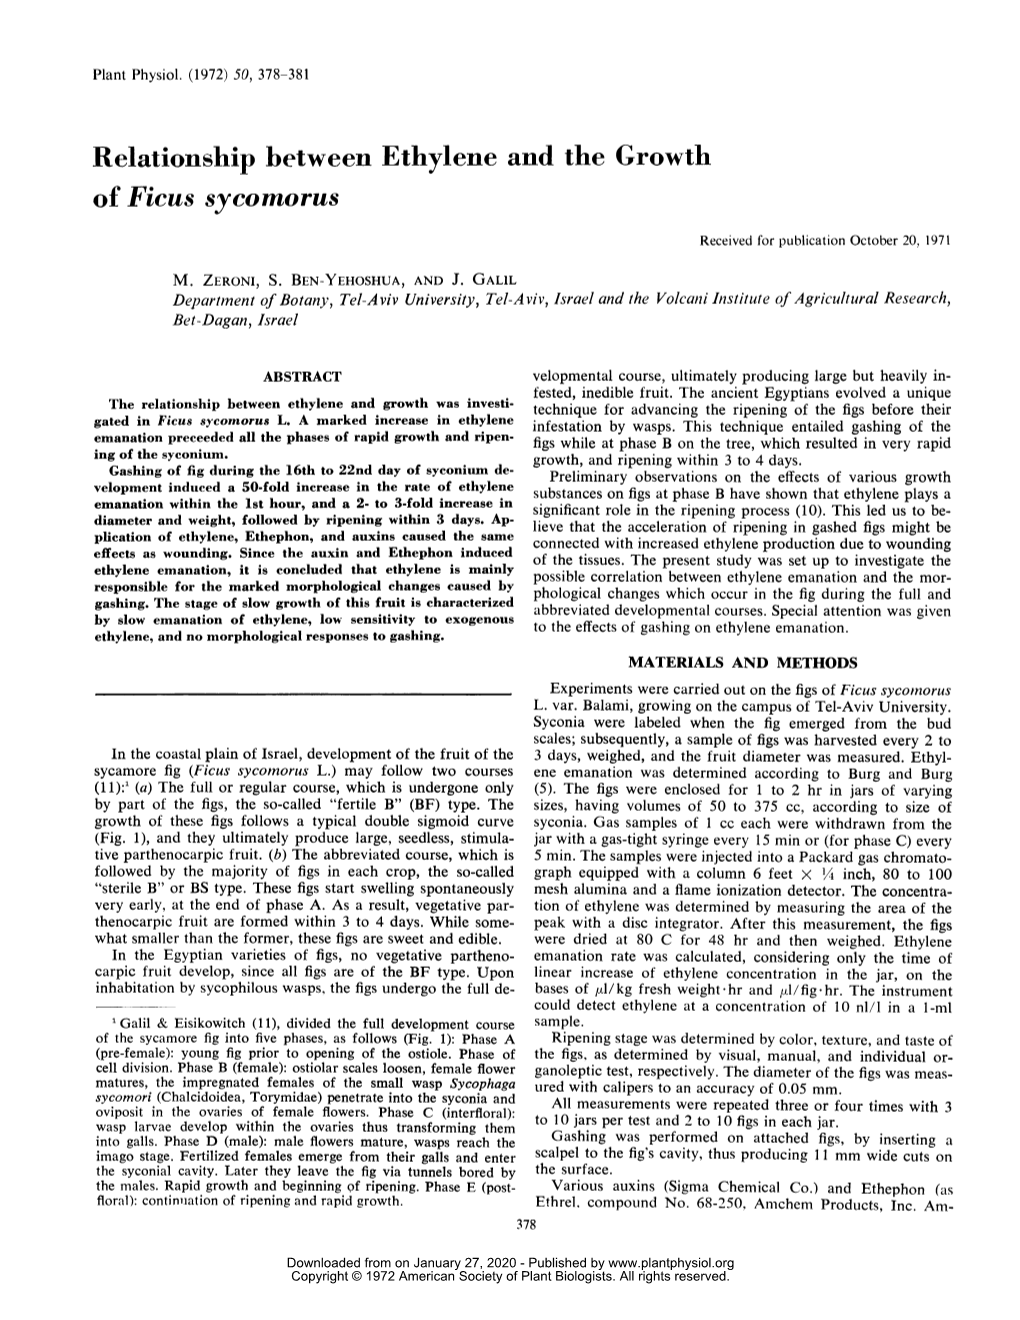 Relationship Between Ethylene and the Growth of Ficus Sycomorus